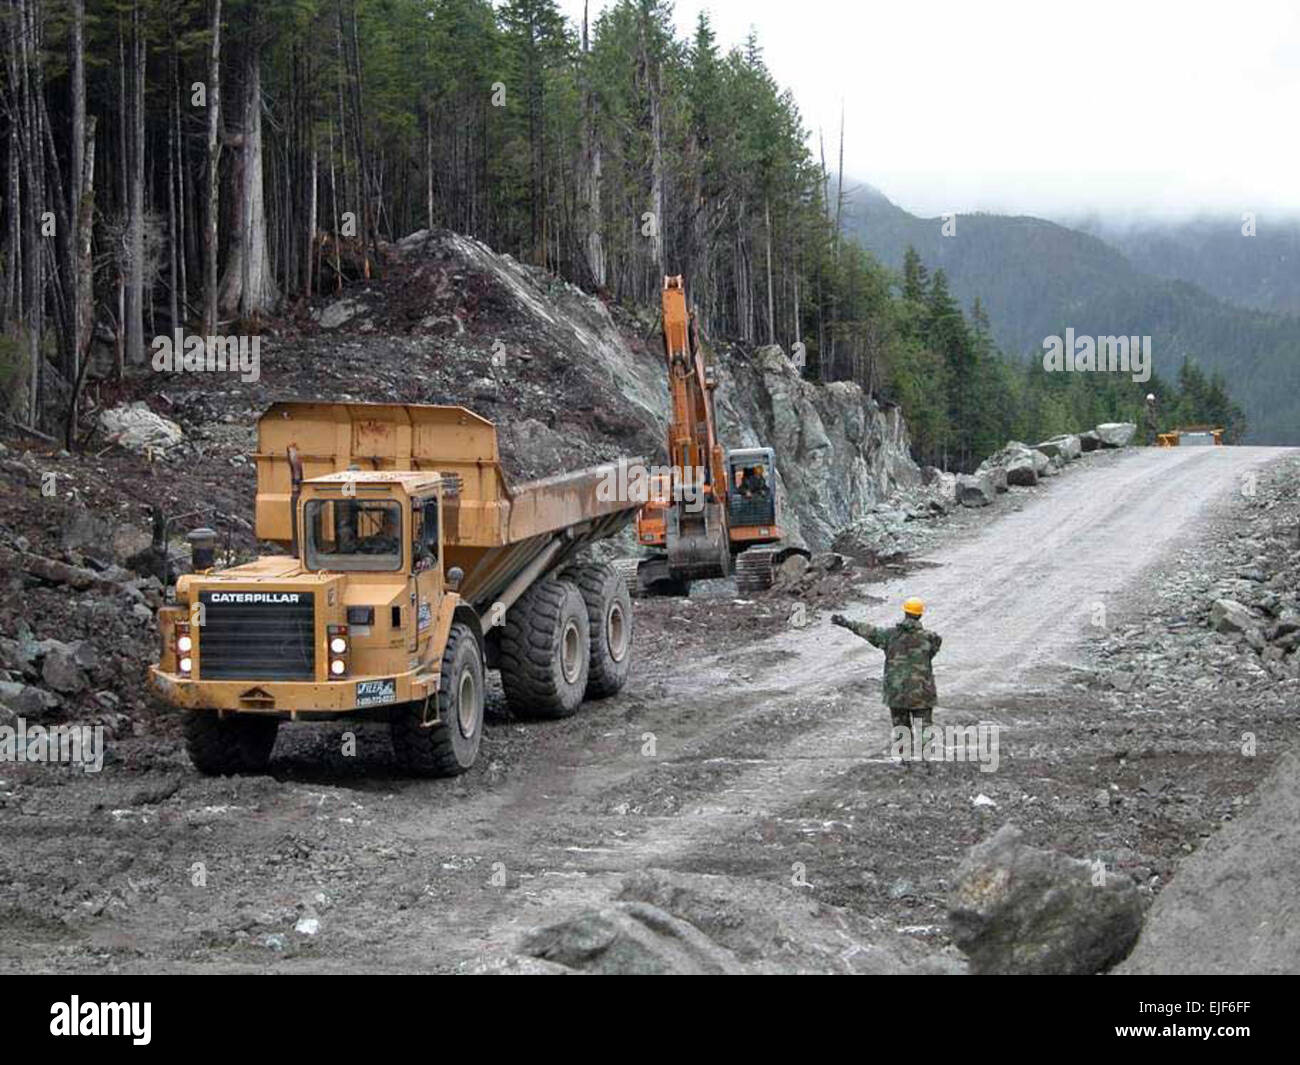 Construction provided by Missouri National Guard members and members of other military services recently concluded on the 14.3-mile roadway on Annette Island, Alaska. First proposed by the Metlakatla Indian community nearly 60 years ago, the road project started to become reality in 1997 when plans were formulated and the base camp, Camp Wy Wuh, was built. Missouri National Guard photo Stock Photo